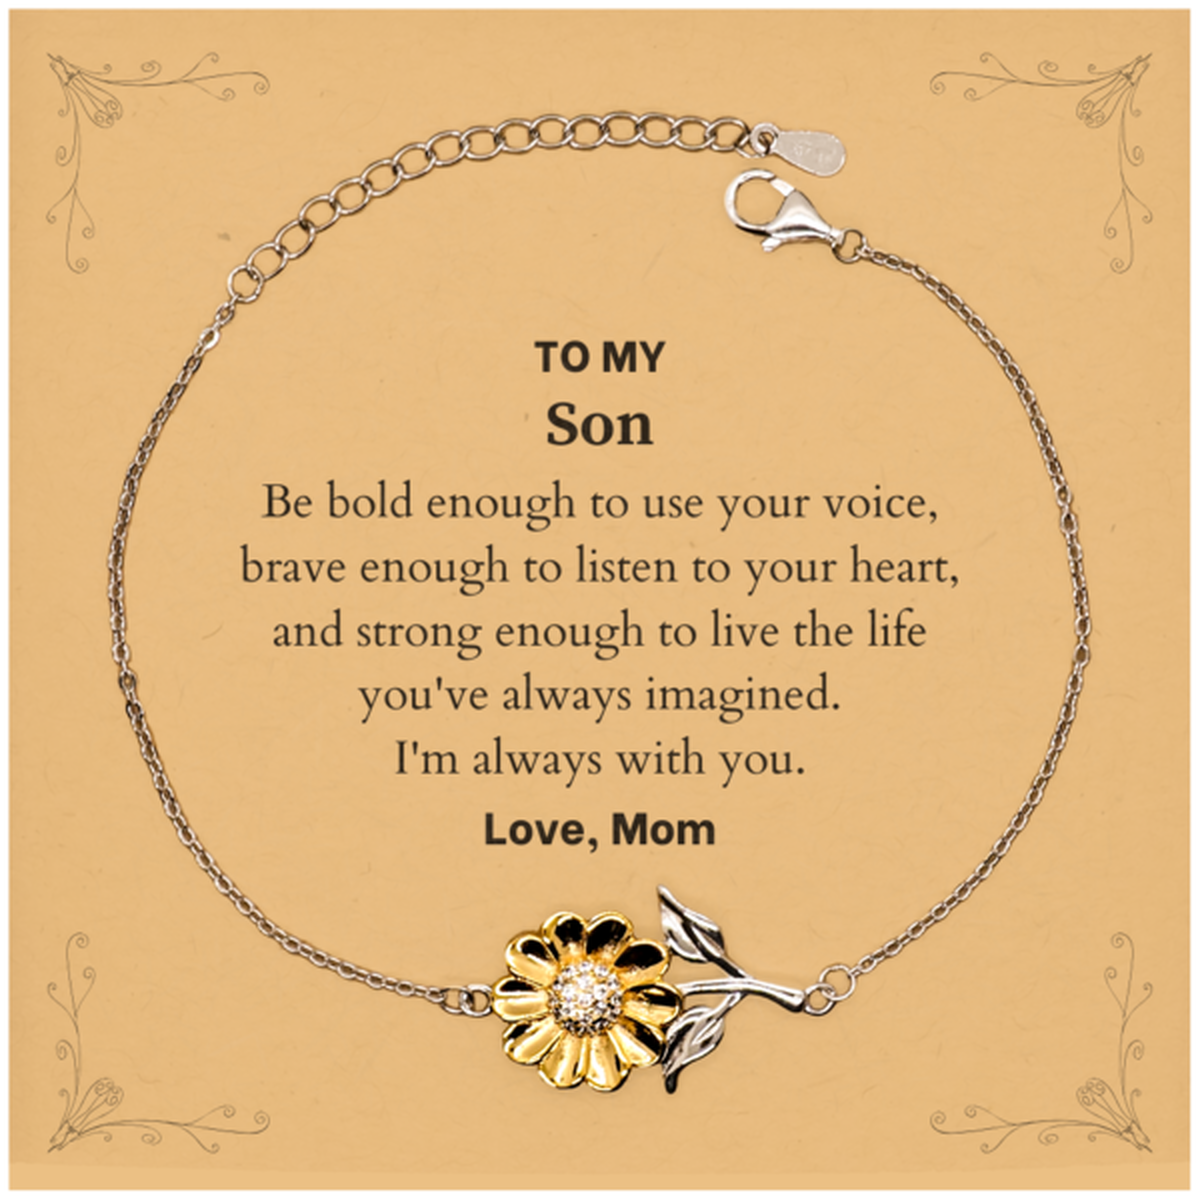 Keepsake Son Sunflower Bracelet Gift Idea Graduation Christmas Birthday Son from Mom, Son Be bold enough to use your voice, brave enough to listen to your heart. Love, Mom